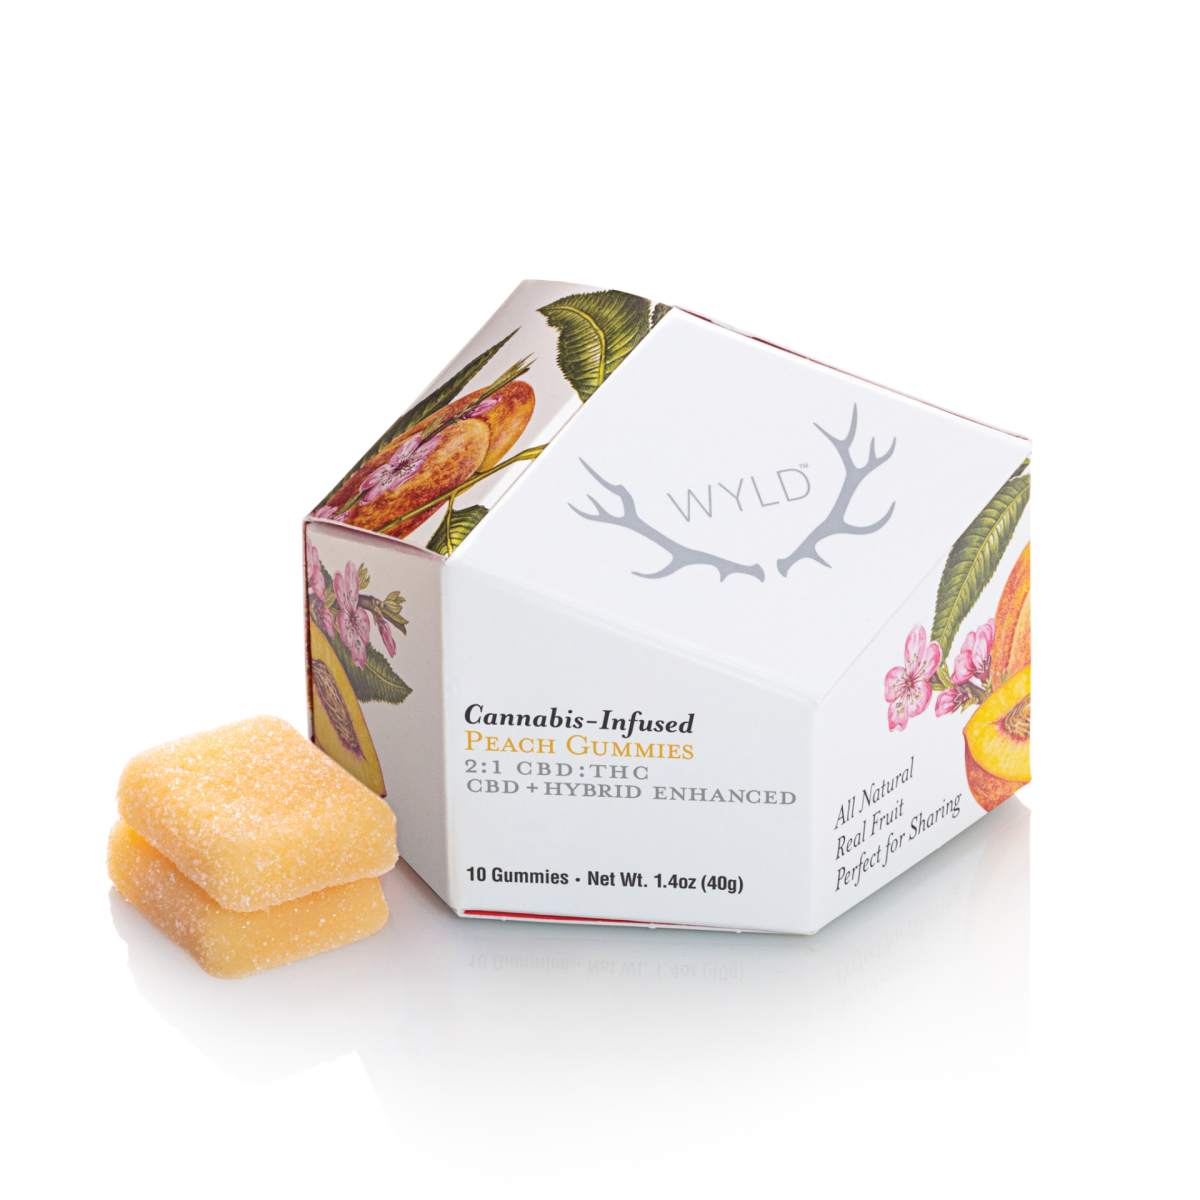 WYLD Pear Gummies. New to edibles? Our Peach 2:1 CBD:THC gummies are made with more CBD than THC, making them a great option for easing into edibles.